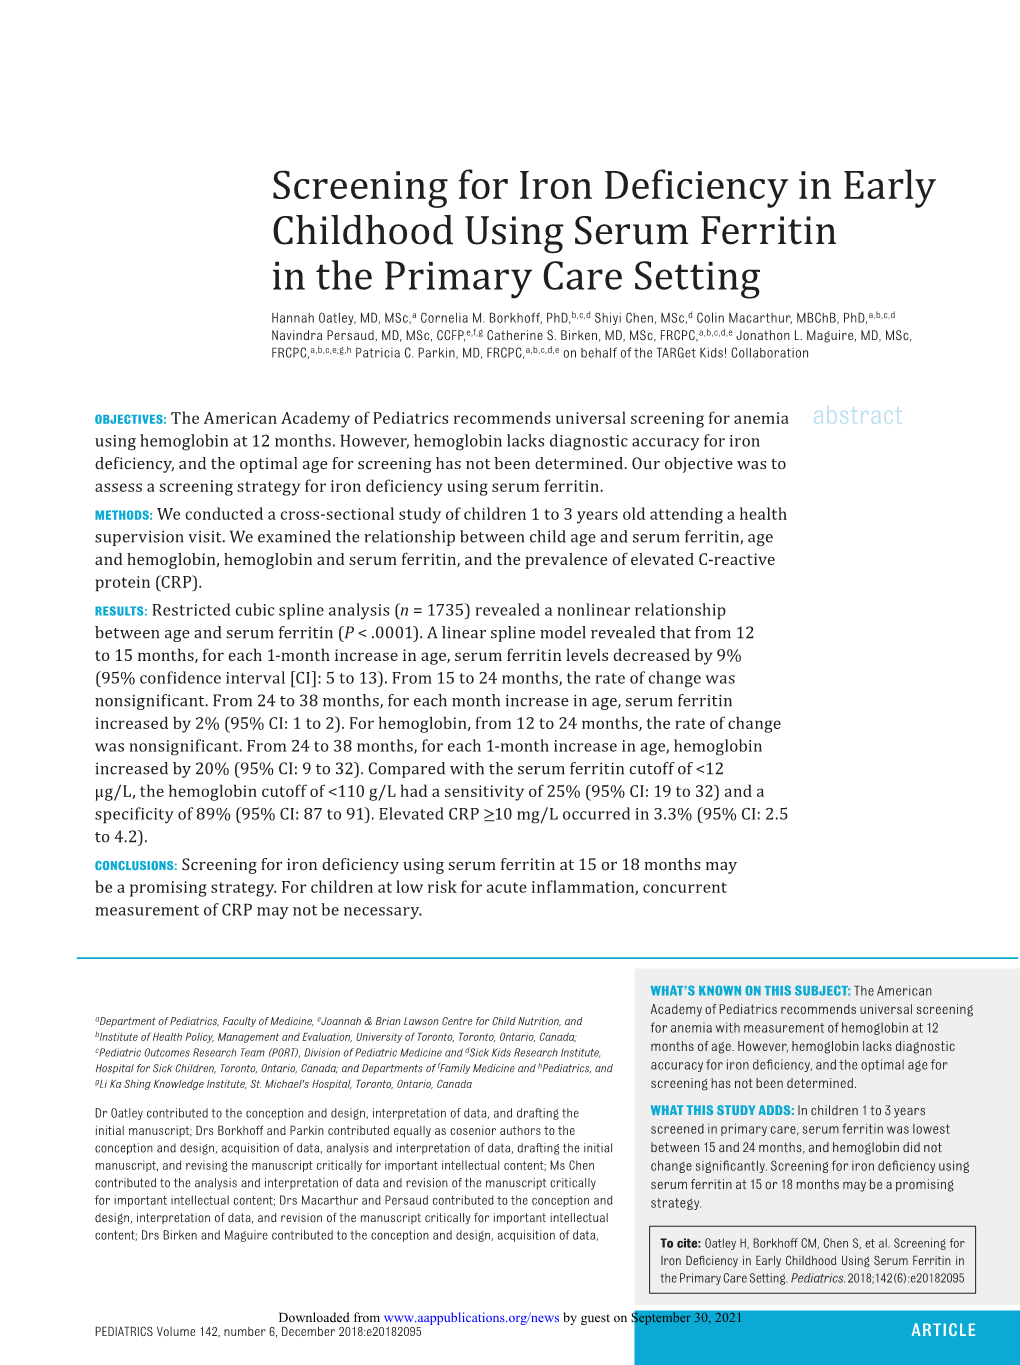 Screening for Iron Deficiency in Early Childhood Using Serum Ferritin in the Primary Care Setting